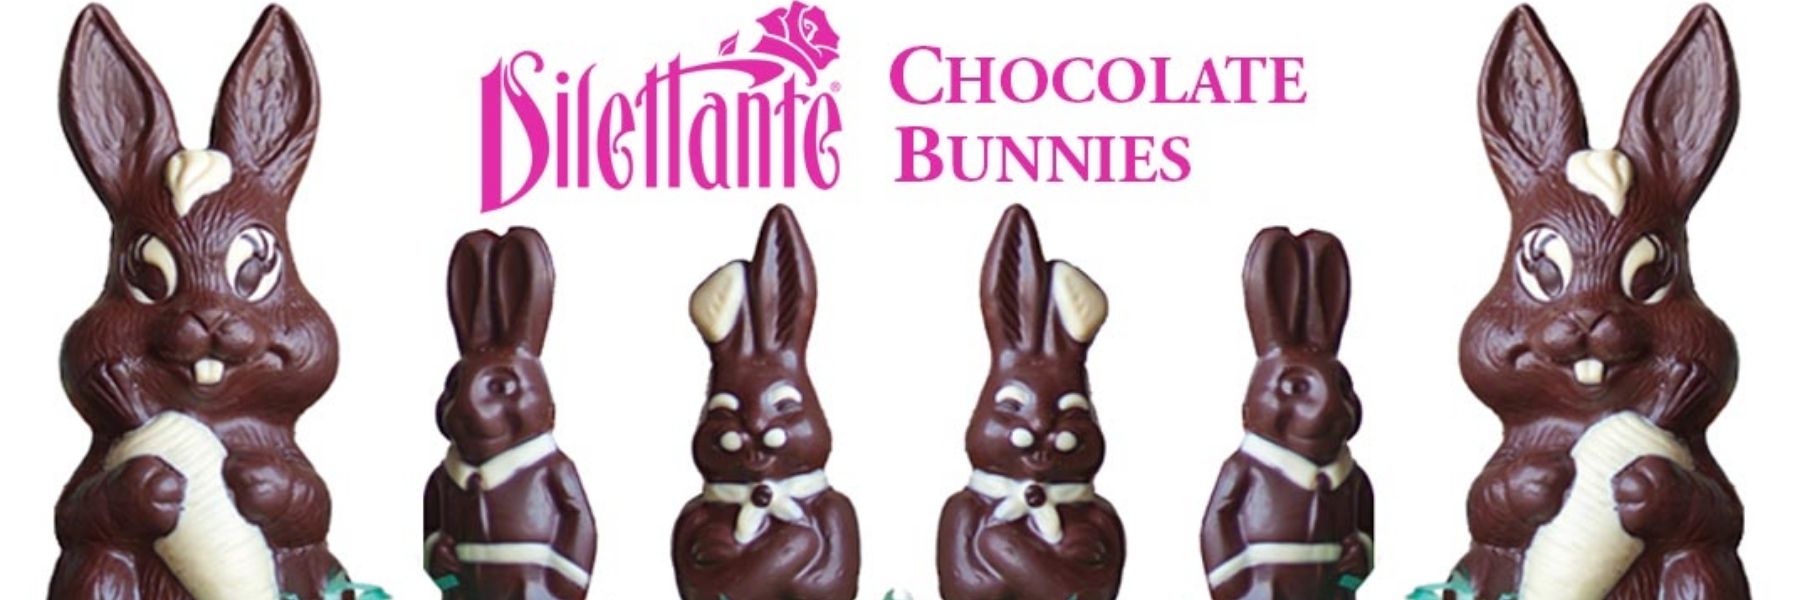 Dilettante Chocolates Selection of Chocolate Easter Bunnies